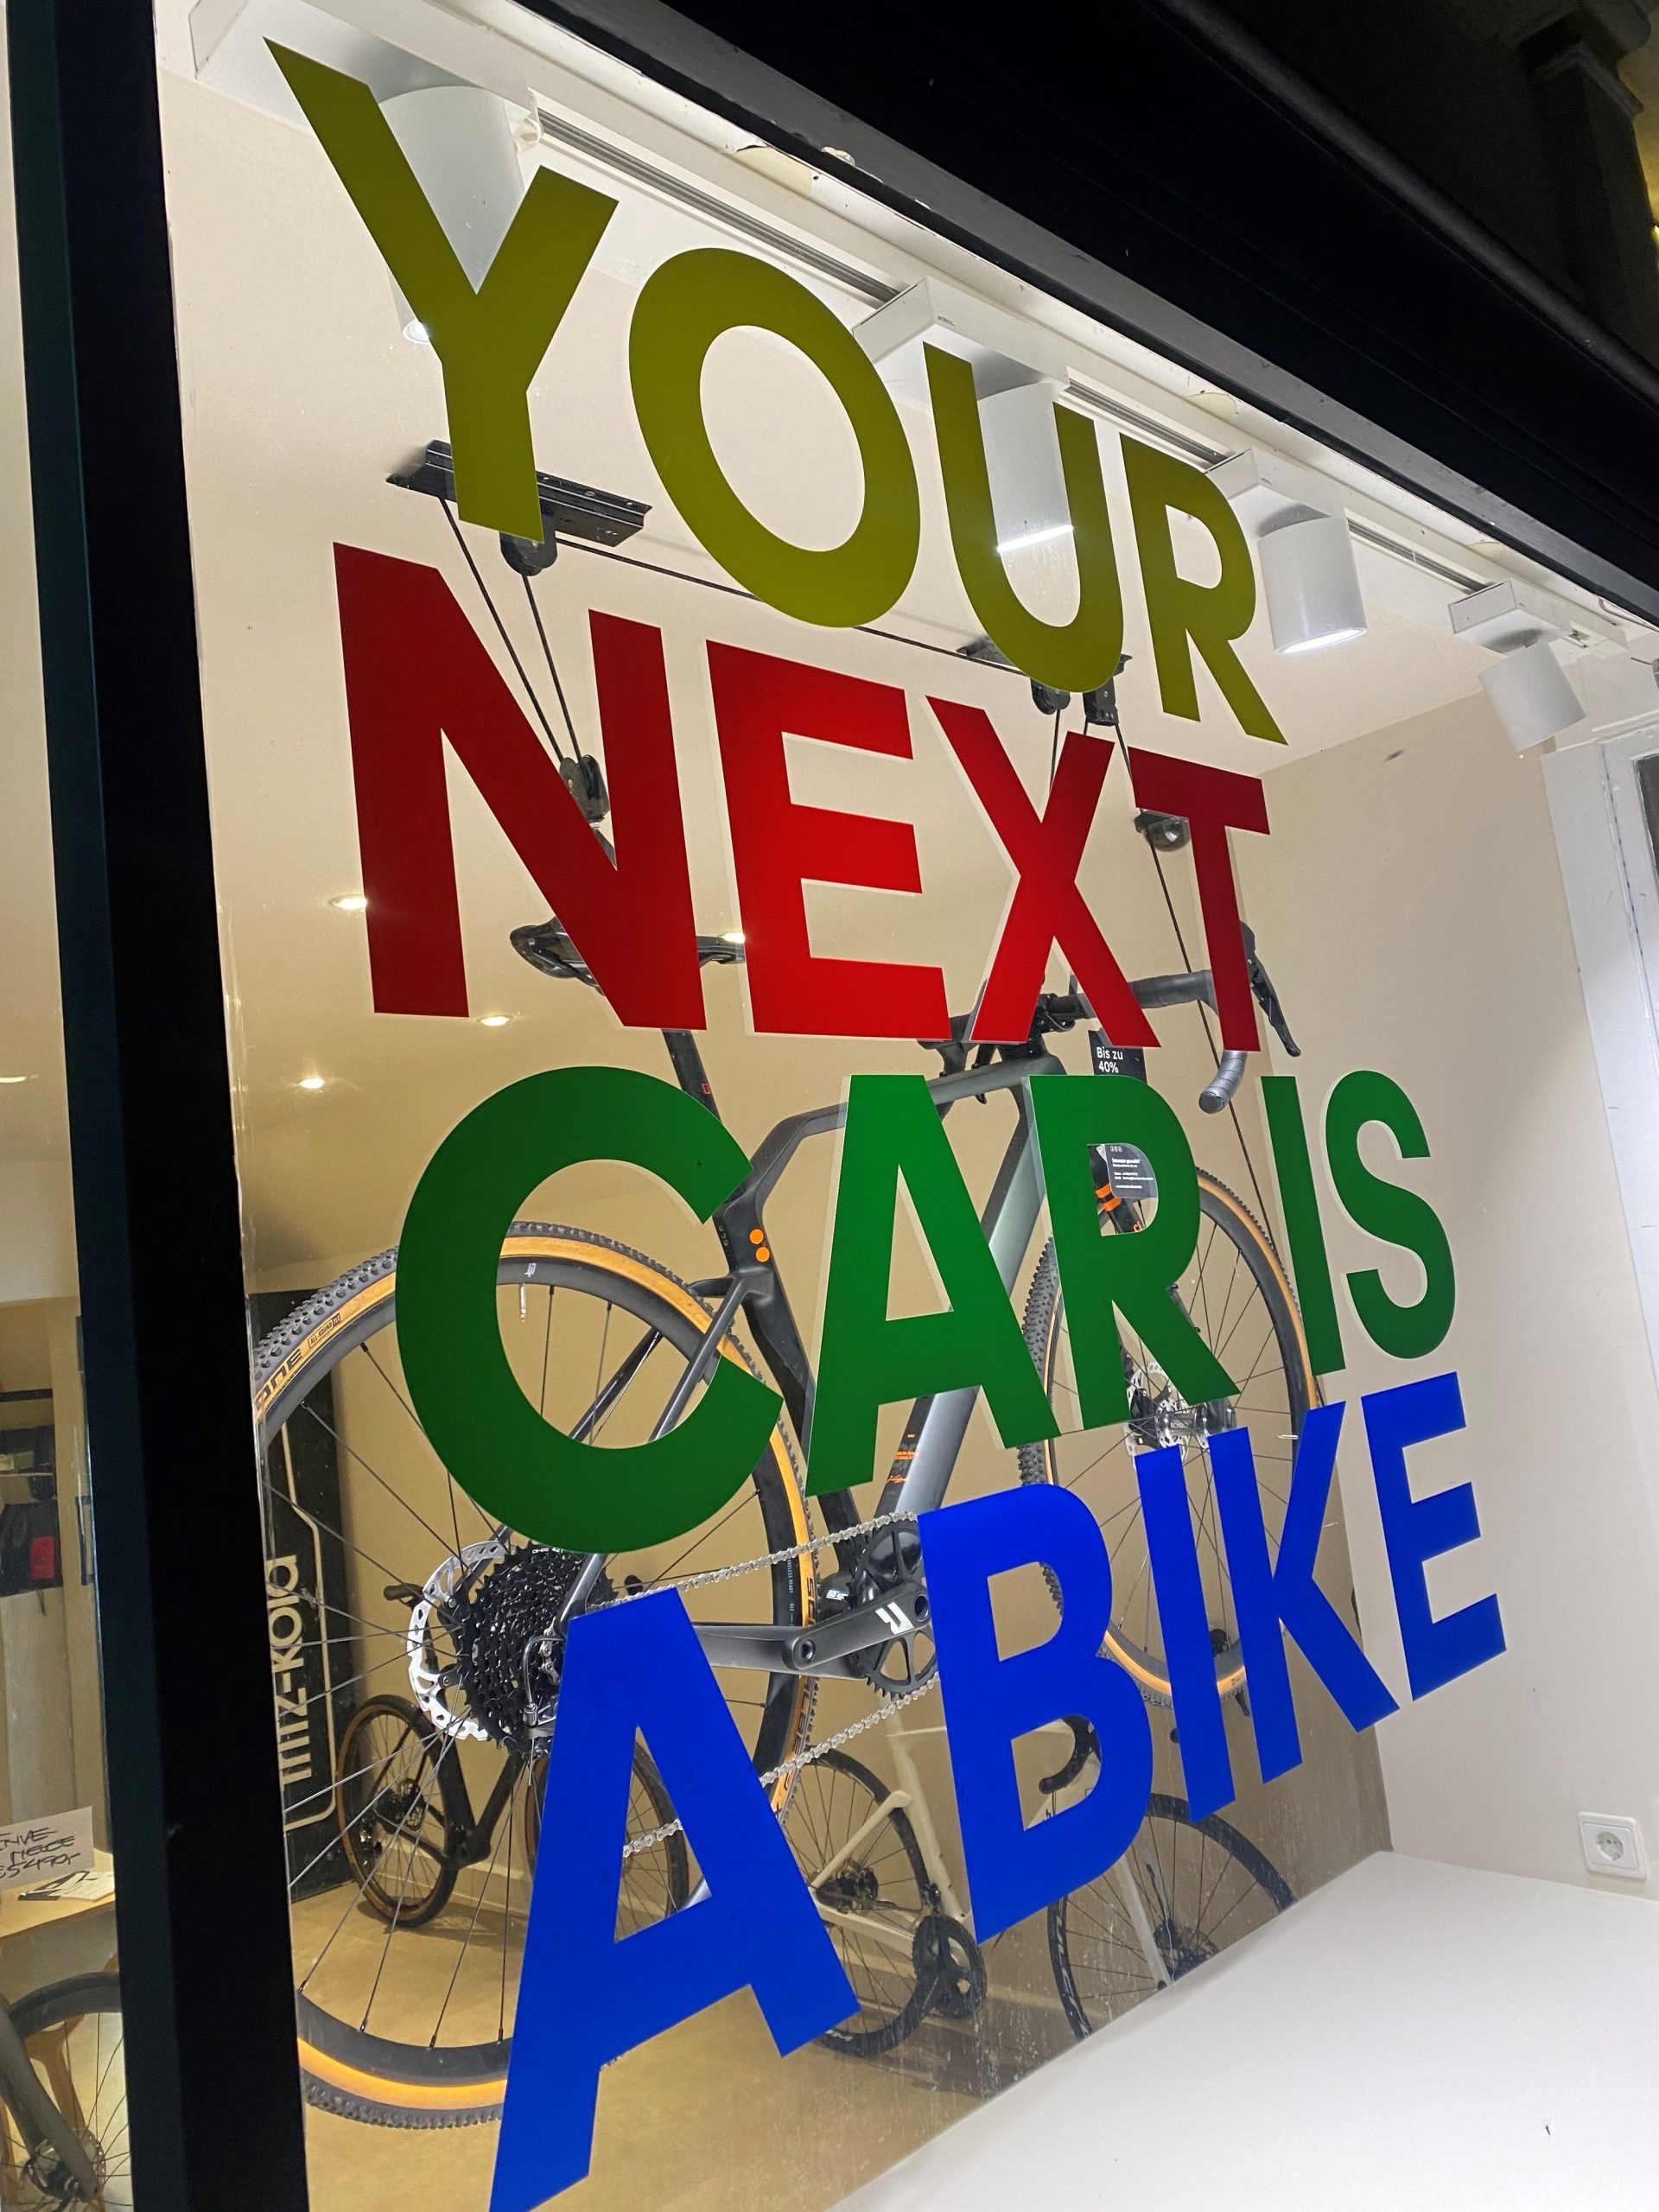 YOUR NEXT BIKE IS A CAR